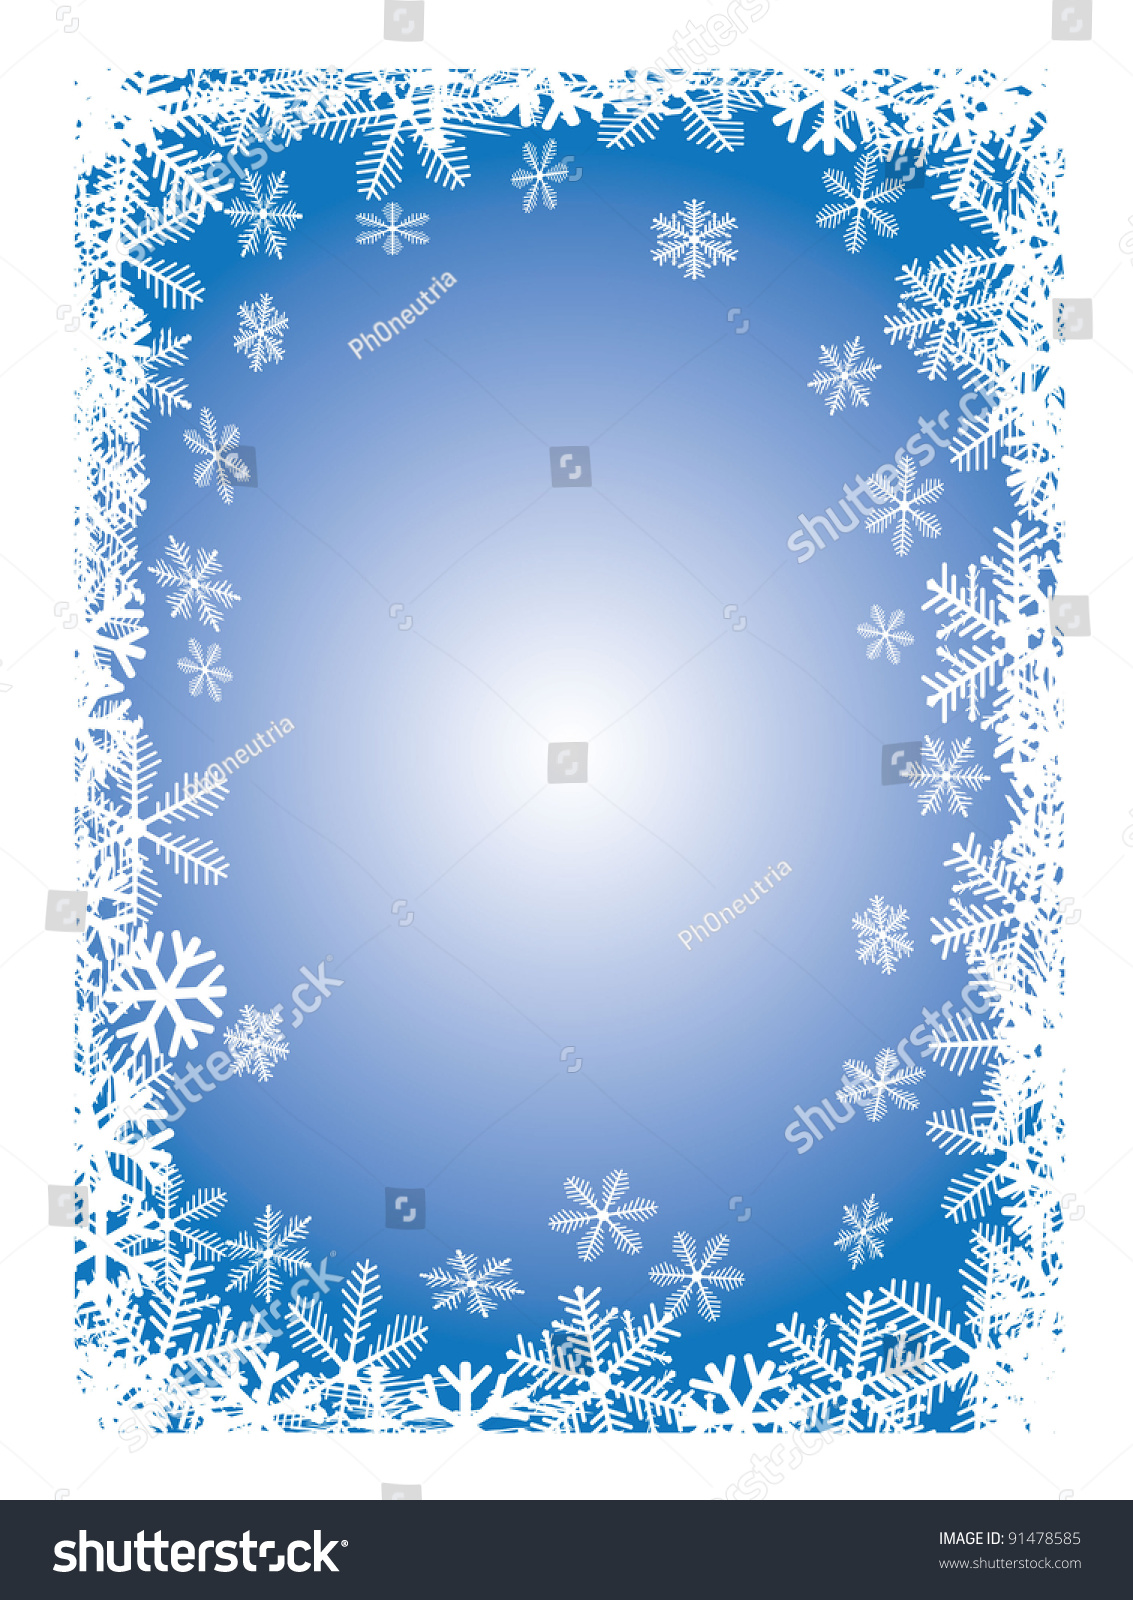 Winter Background Snowflakes Vertical Alignment Illustration Stock Vector Royalty Free 91478585